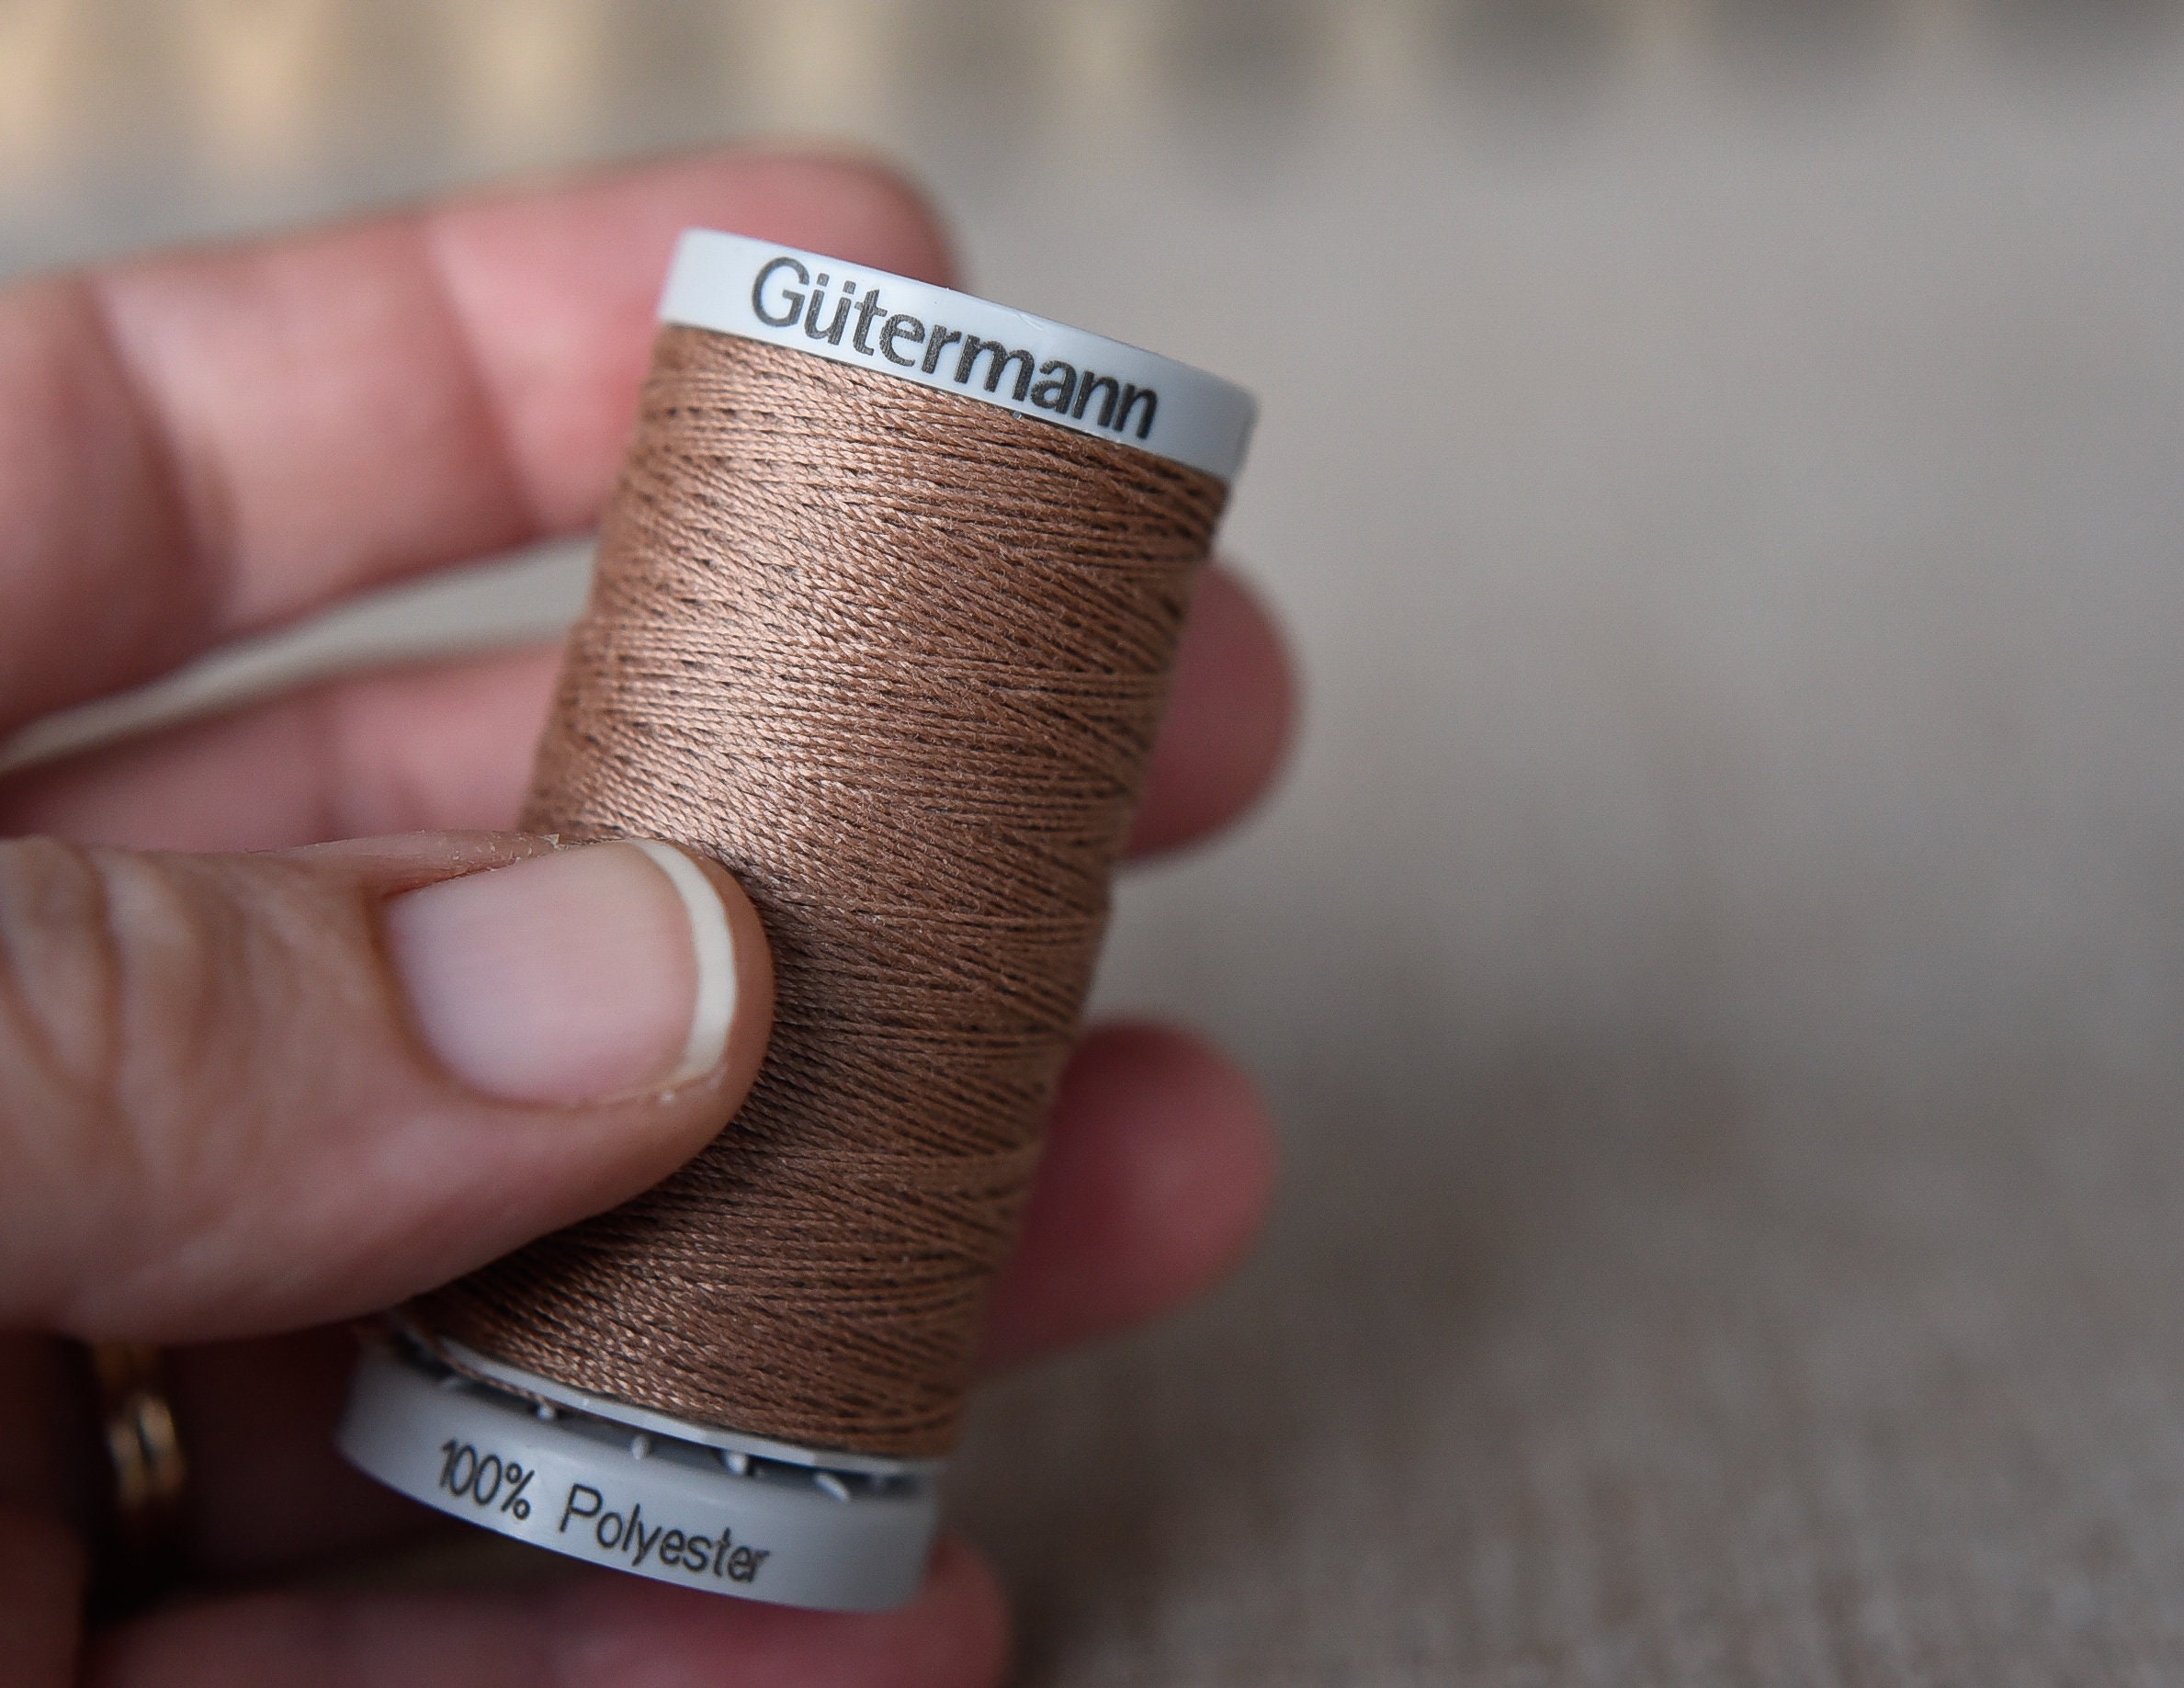 Extra Stong Polyester Upholstery Thread Brown Gutermann 139 